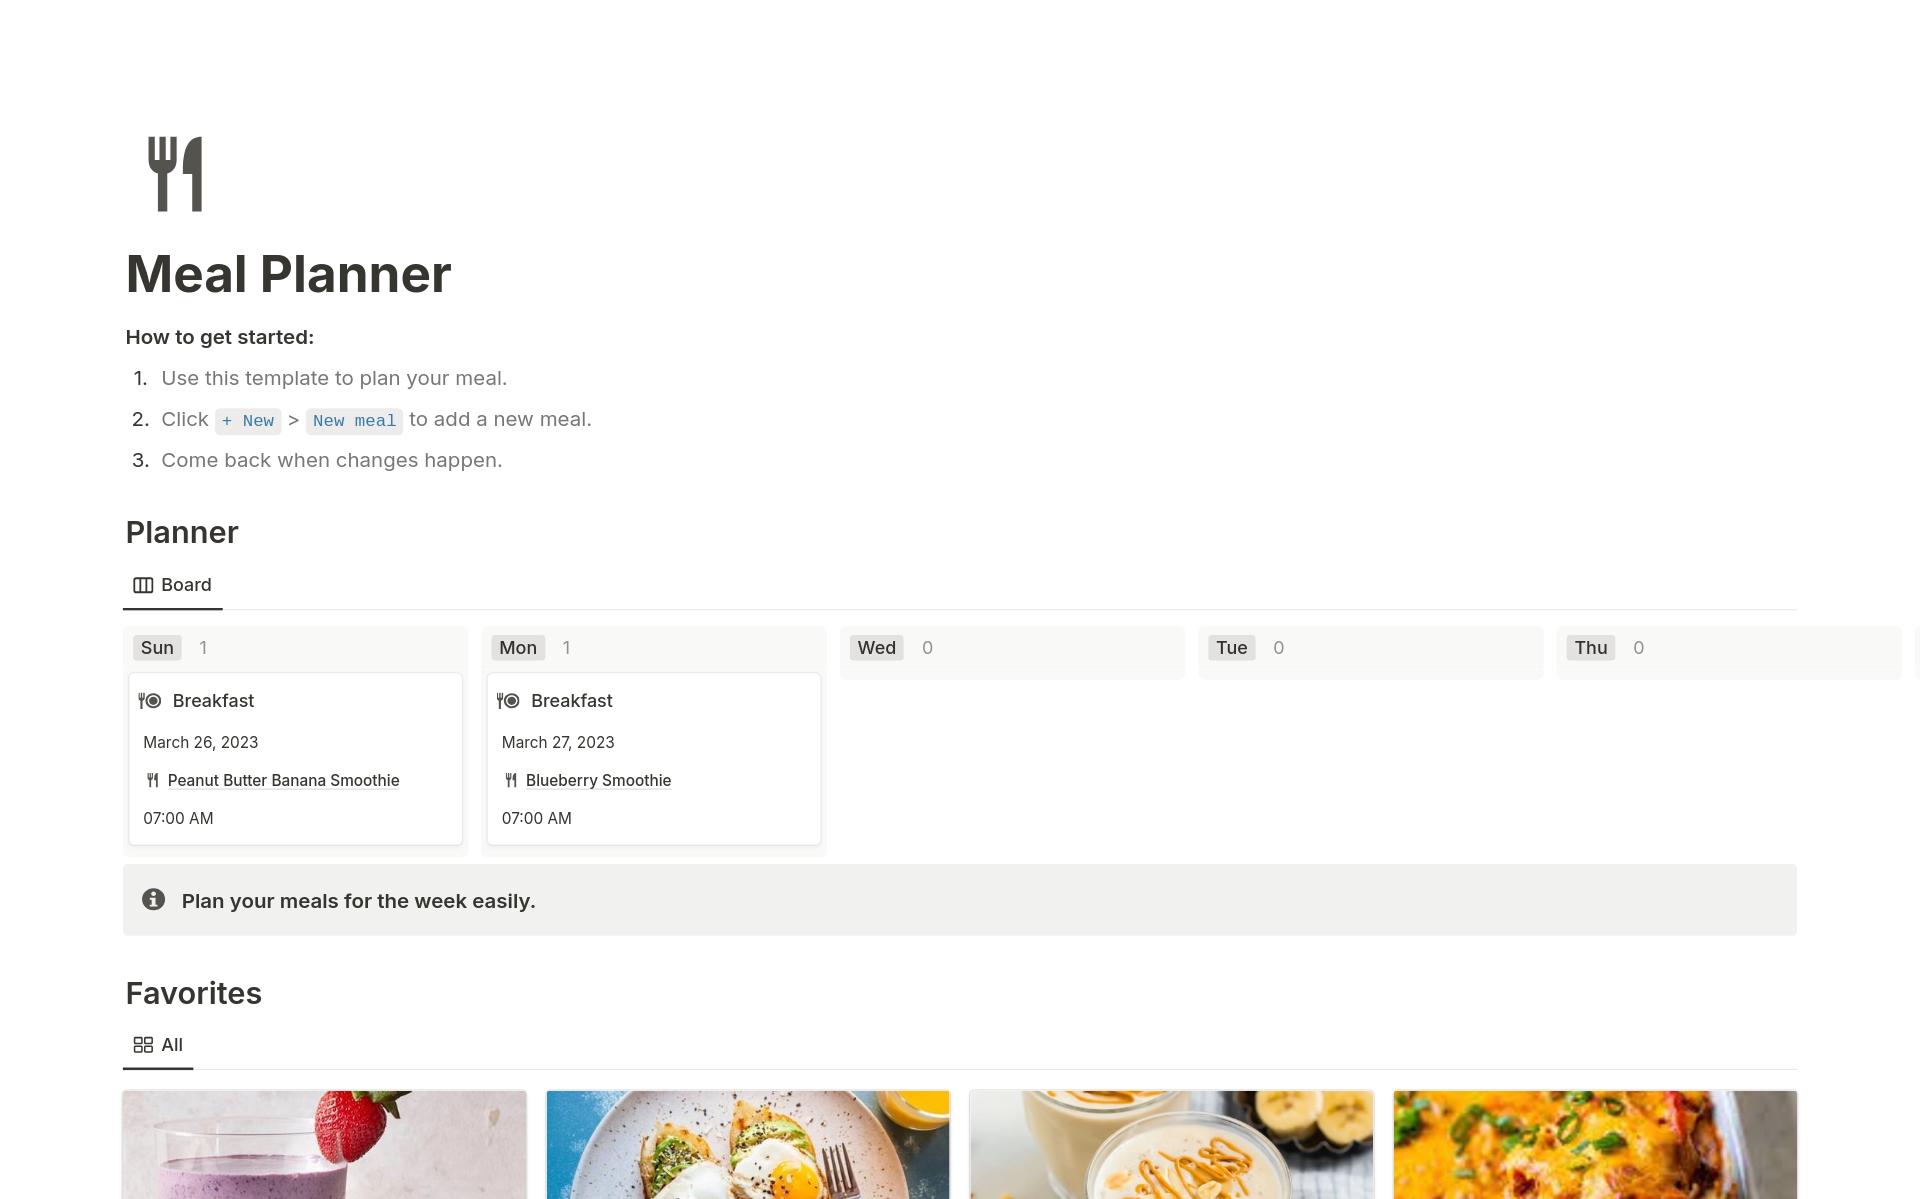 Plan your meals for the week, manage your favorite recipes, and track your grocery list.
